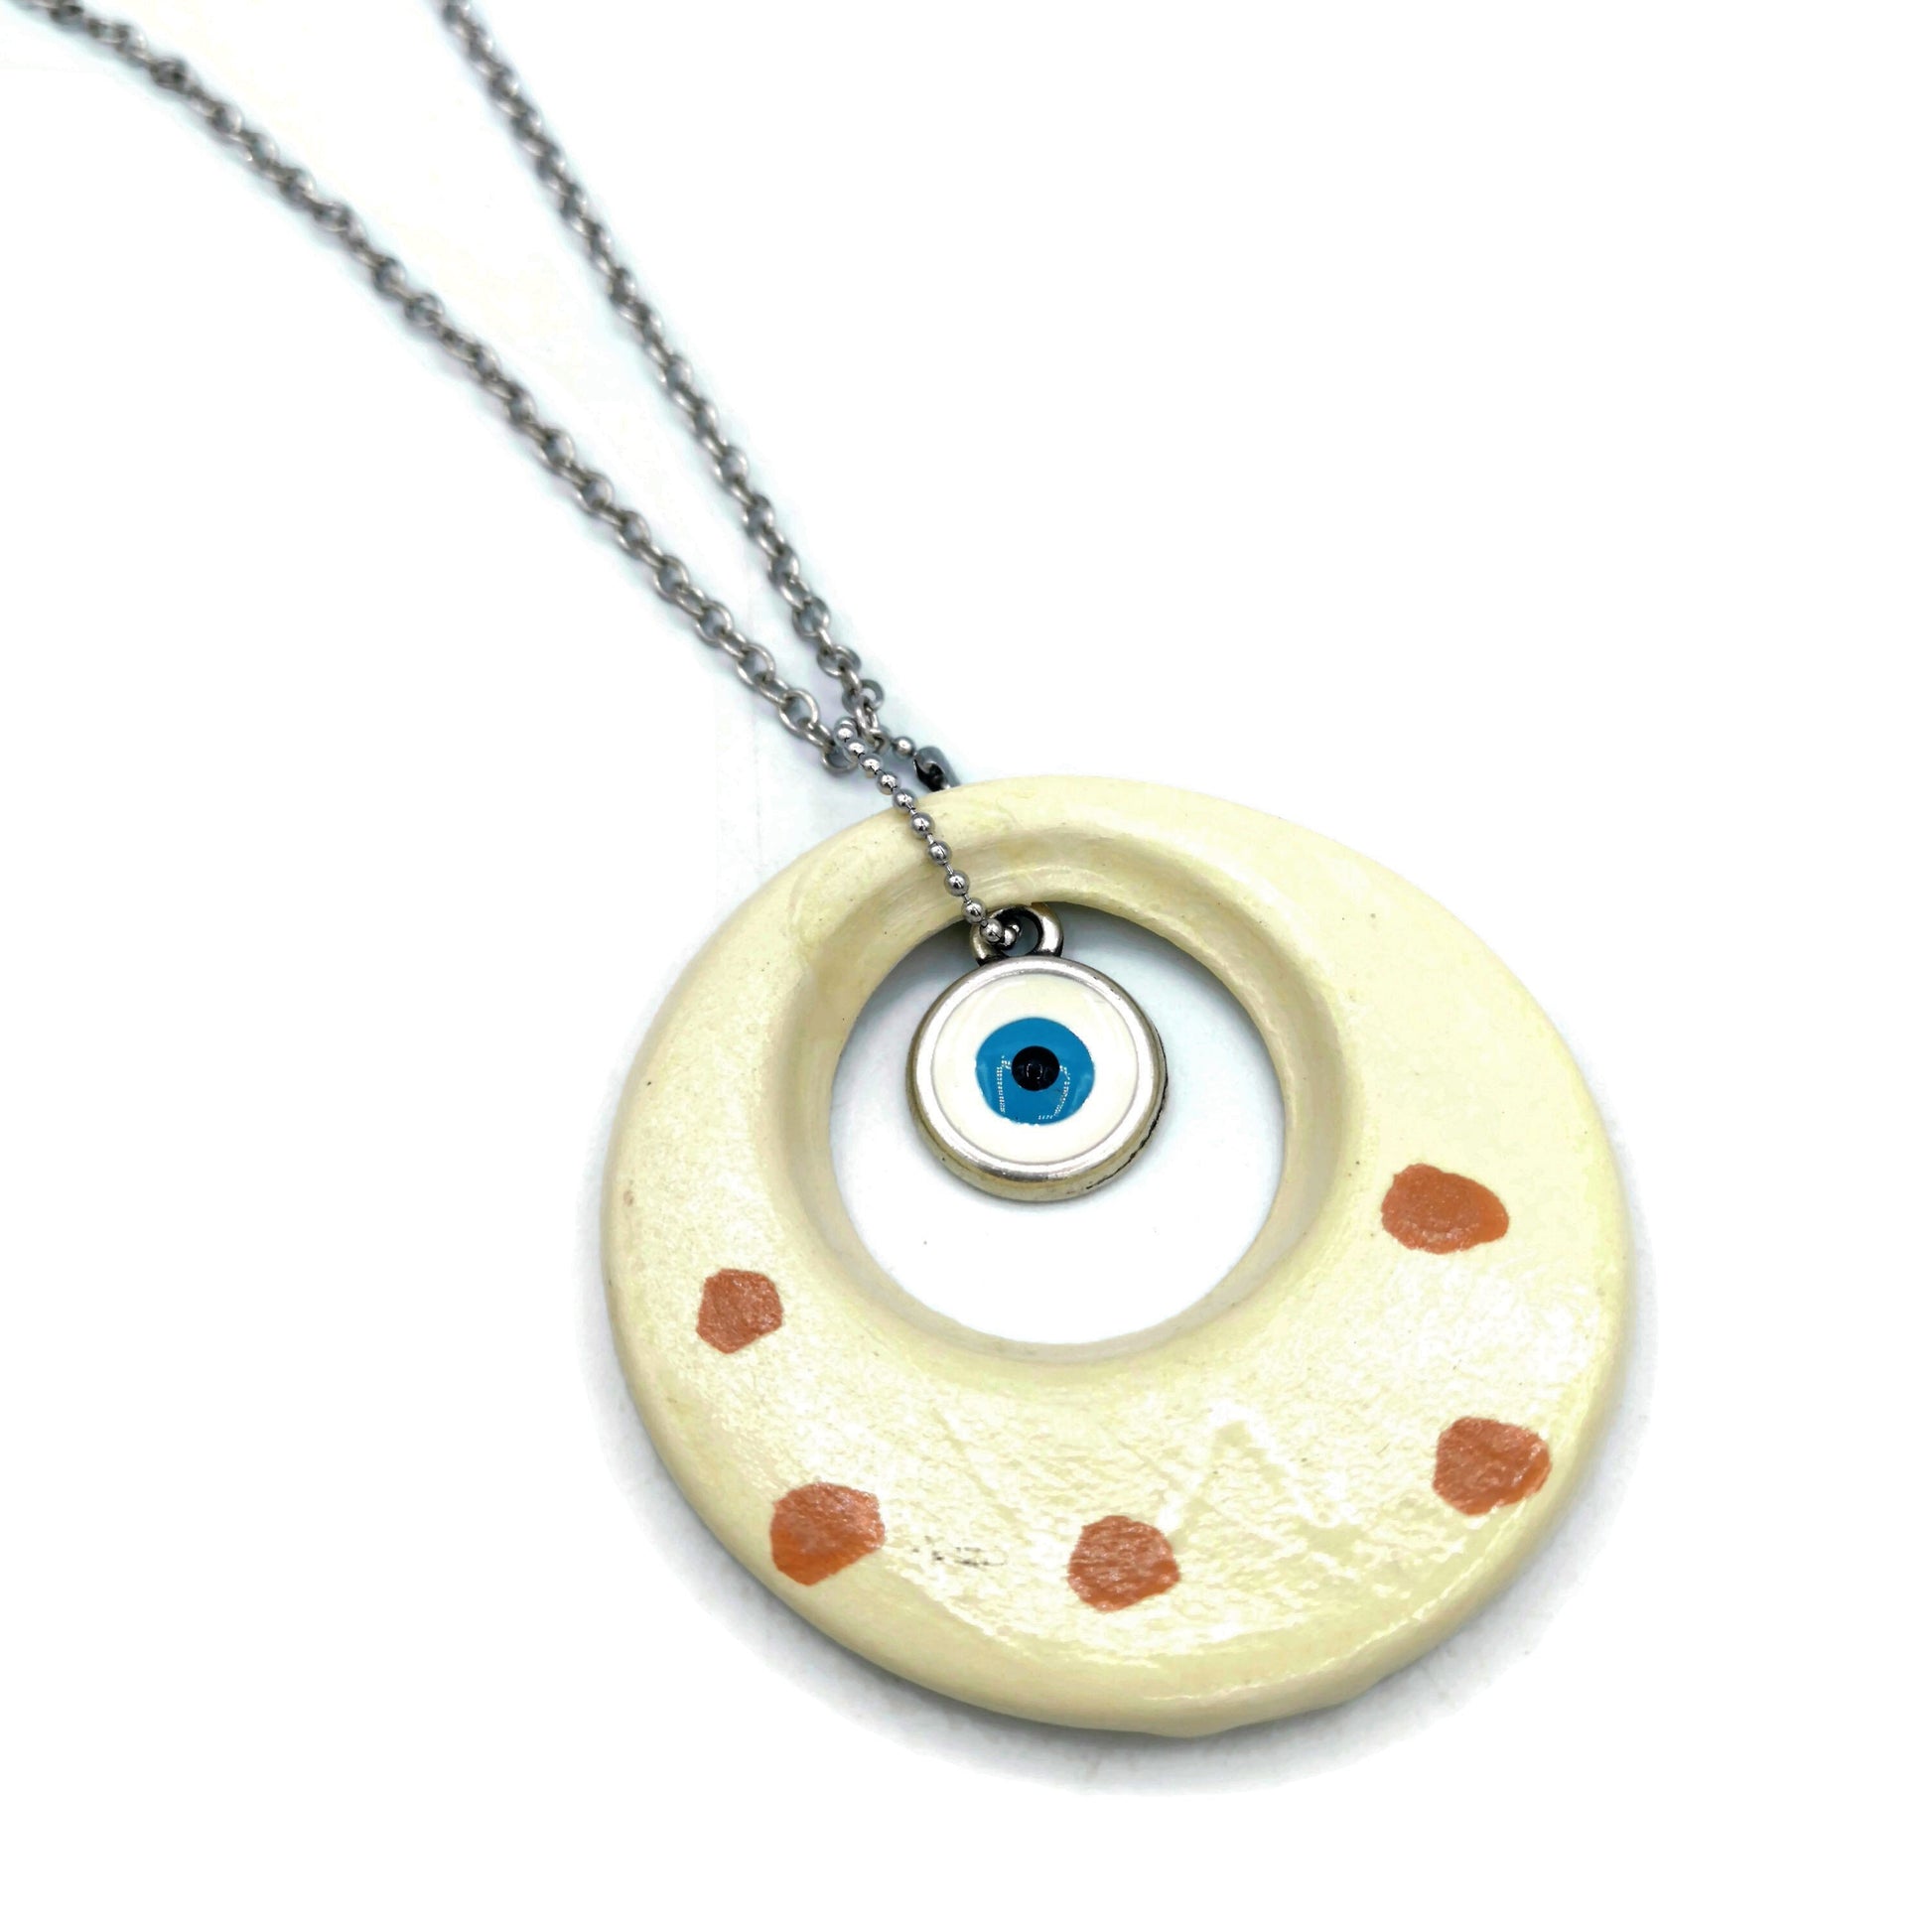 Large evil eye necklace for women, unique birthday gifts for sister, ceramic necklace pendant, 9th anniversary, Best Gifts For Her - Ceramica Ana Rafael